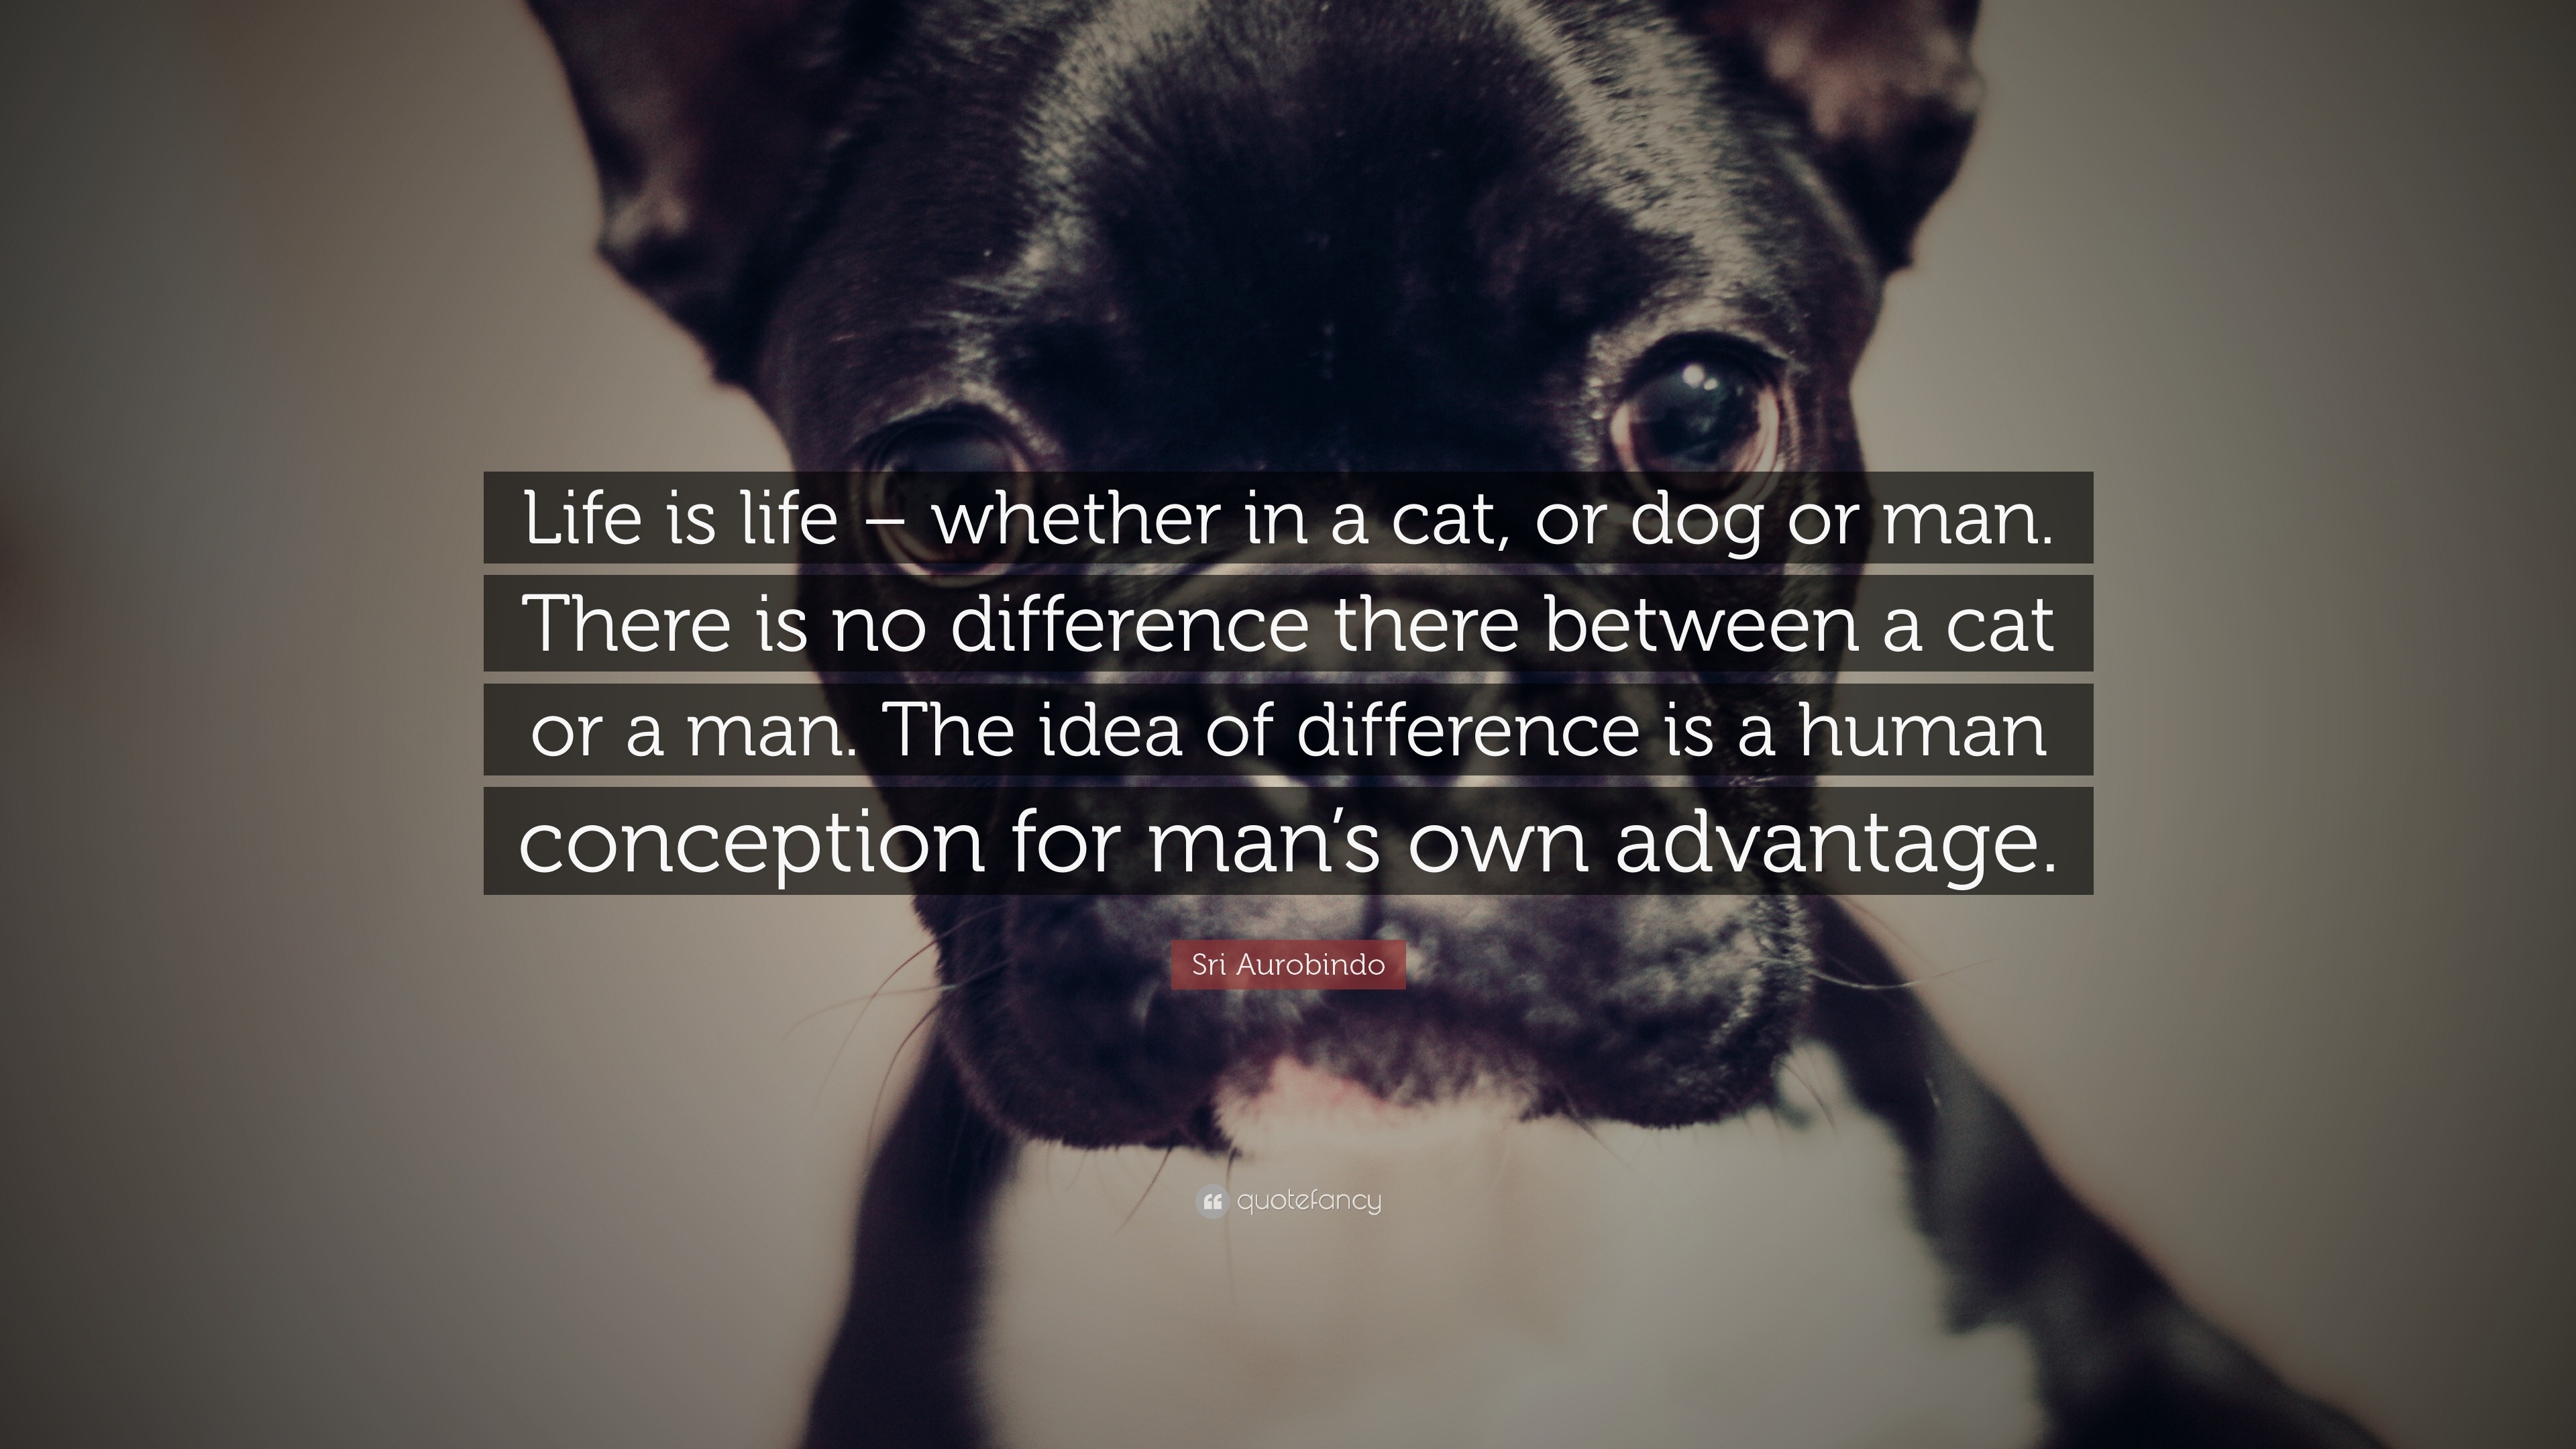 Sri Aurobindo Quote: “Life is life – whether in a cat, or dog or man. There  is no difference there between a cat or a man. The idea of differe...”